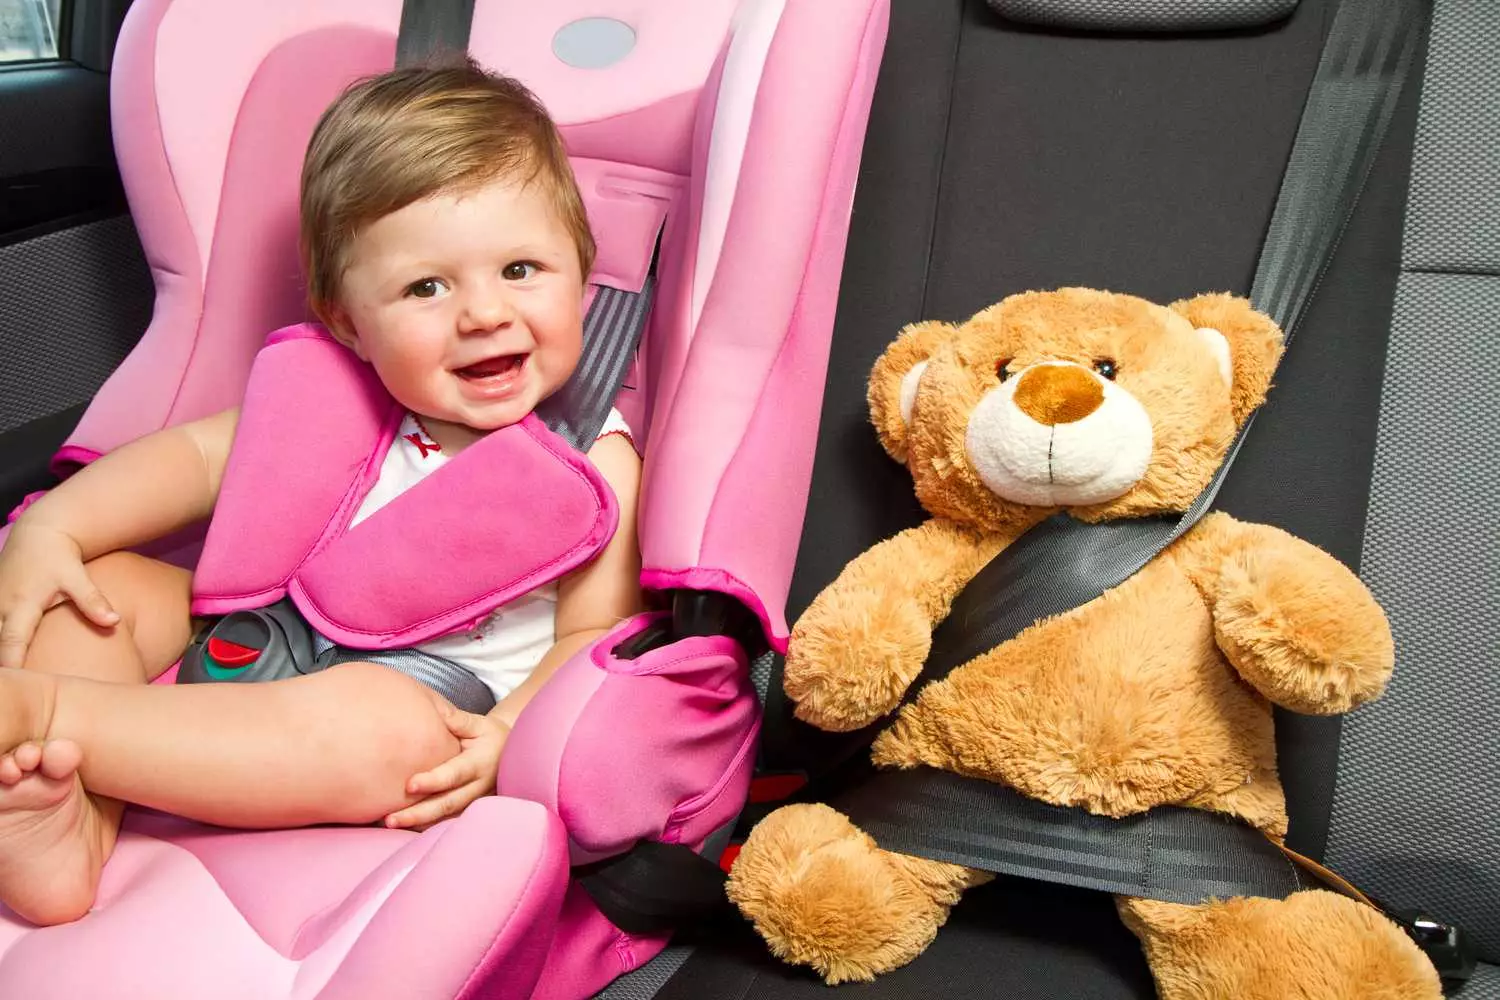 Child Safety In The Car Every Parent Must Be Aware Of by Dr. Chetan Ginigeri